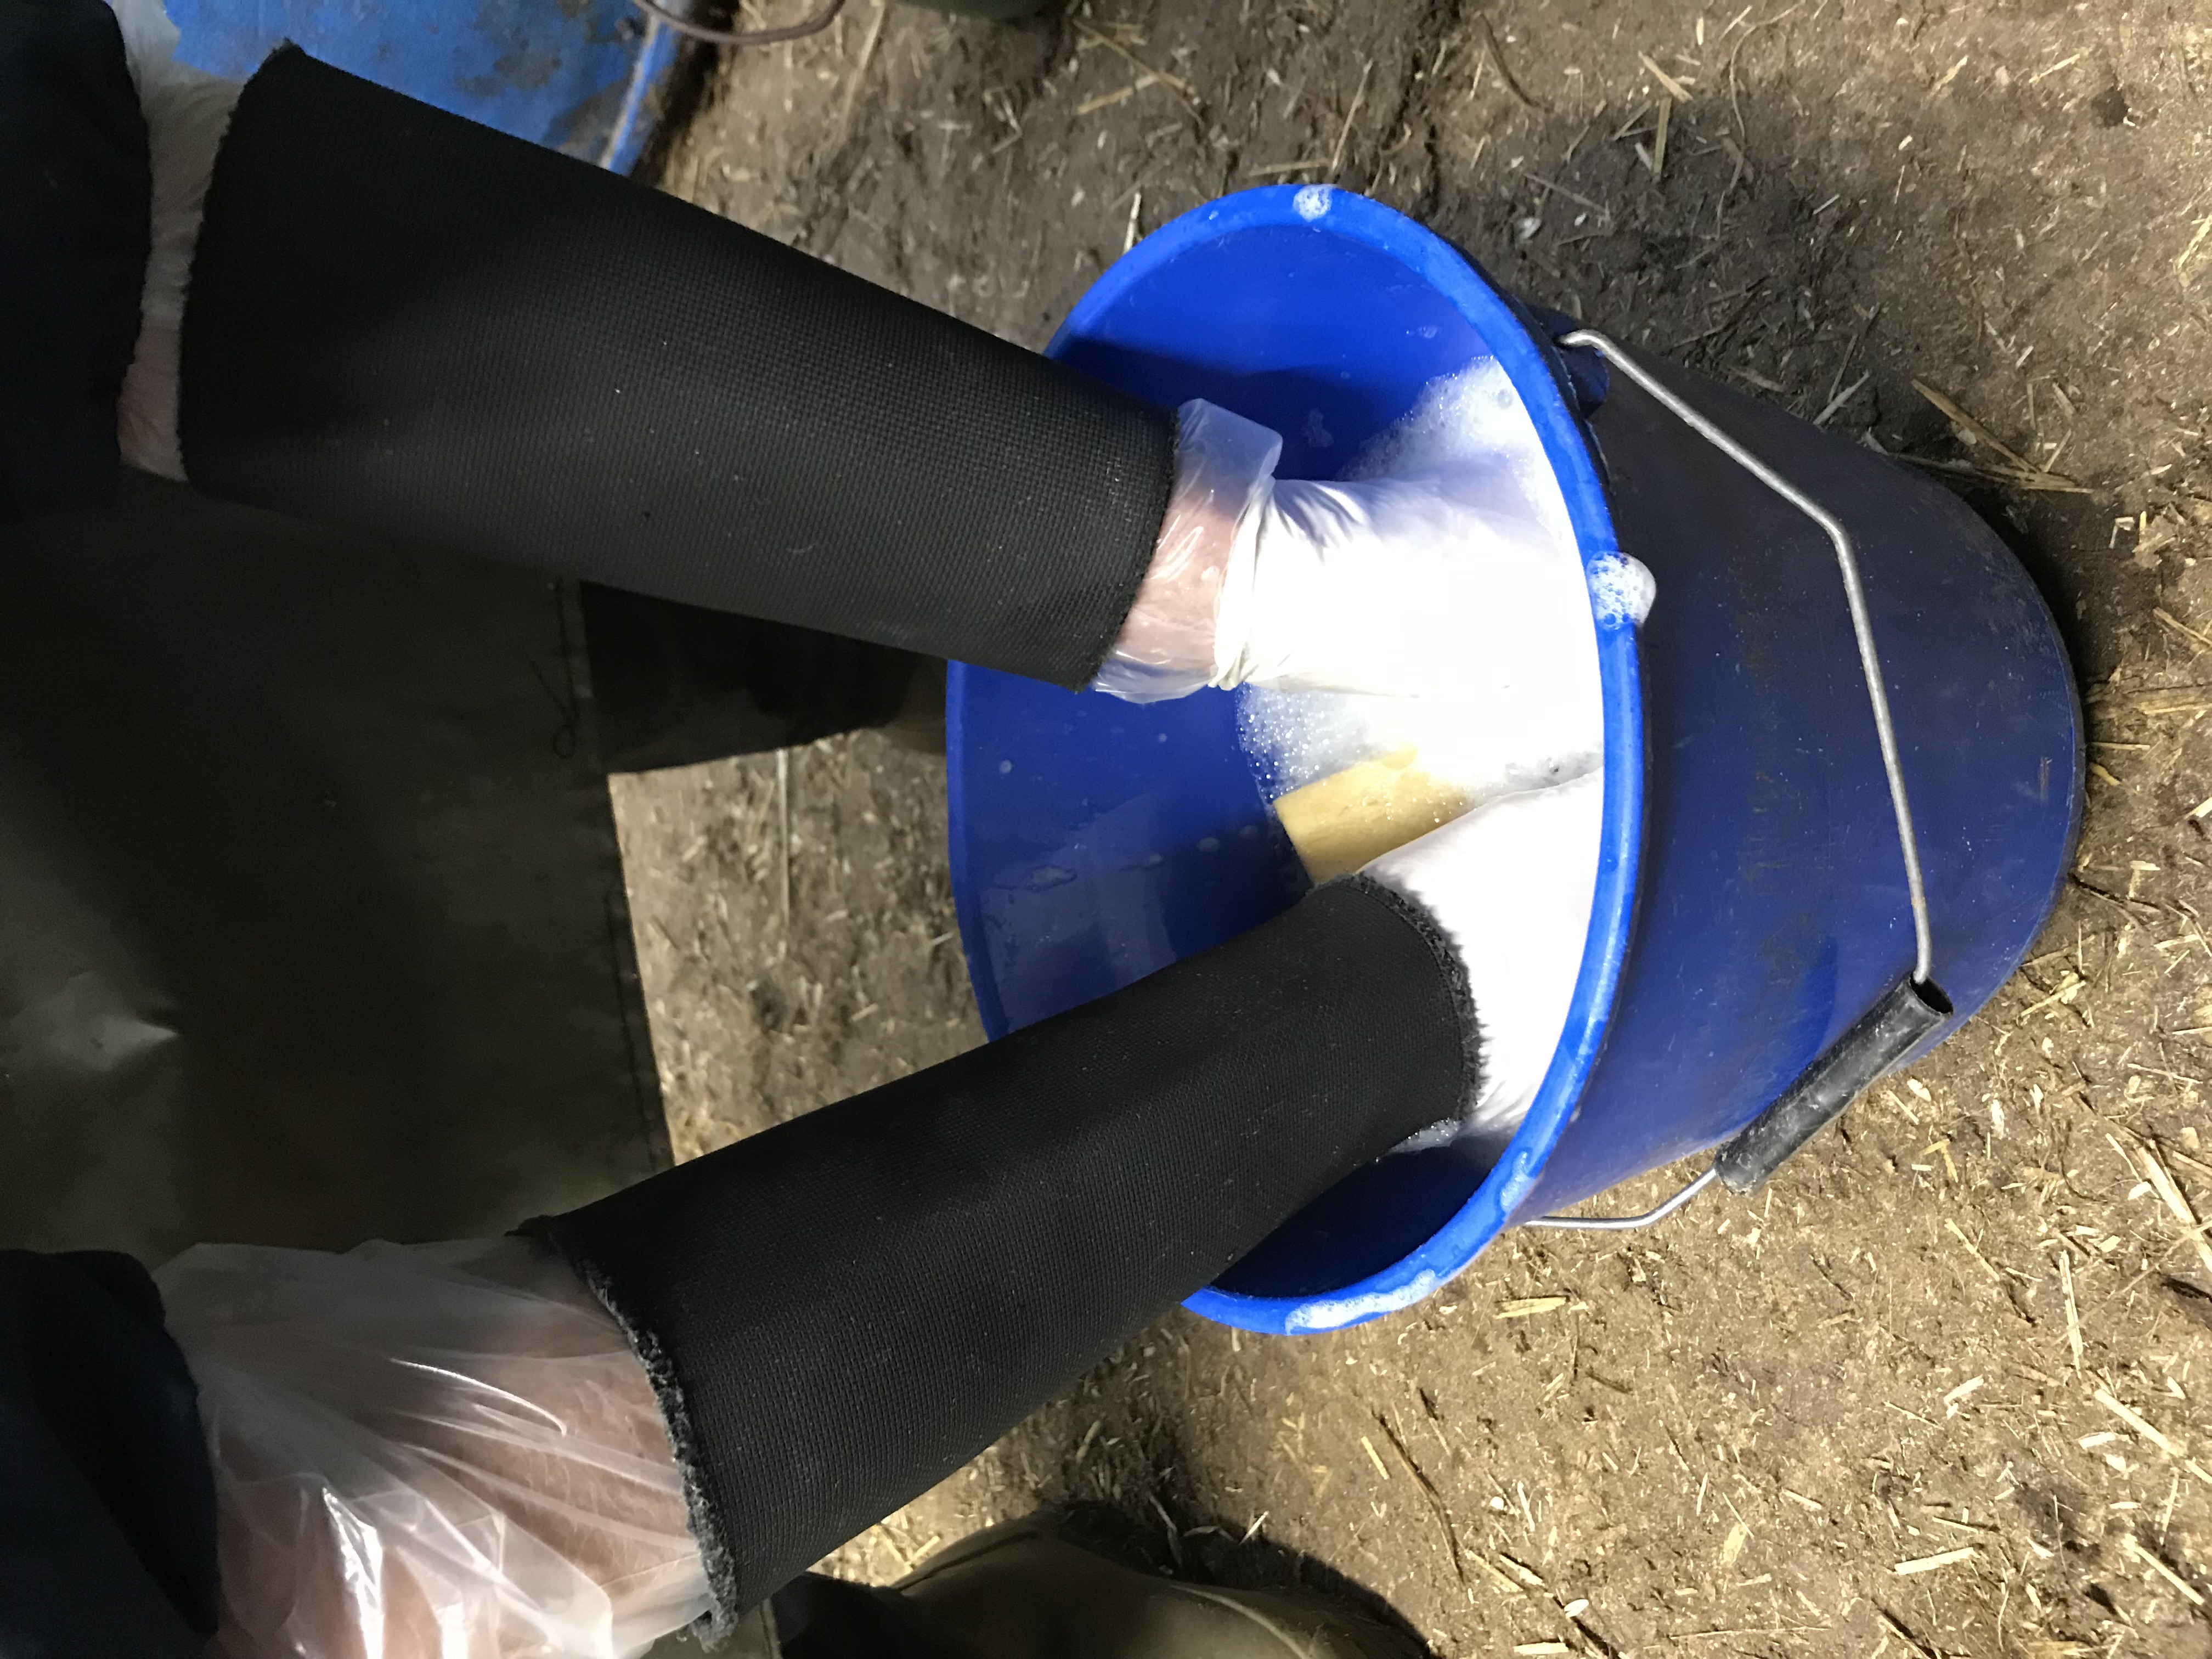 Cattle foot trimming: equipment disinfection